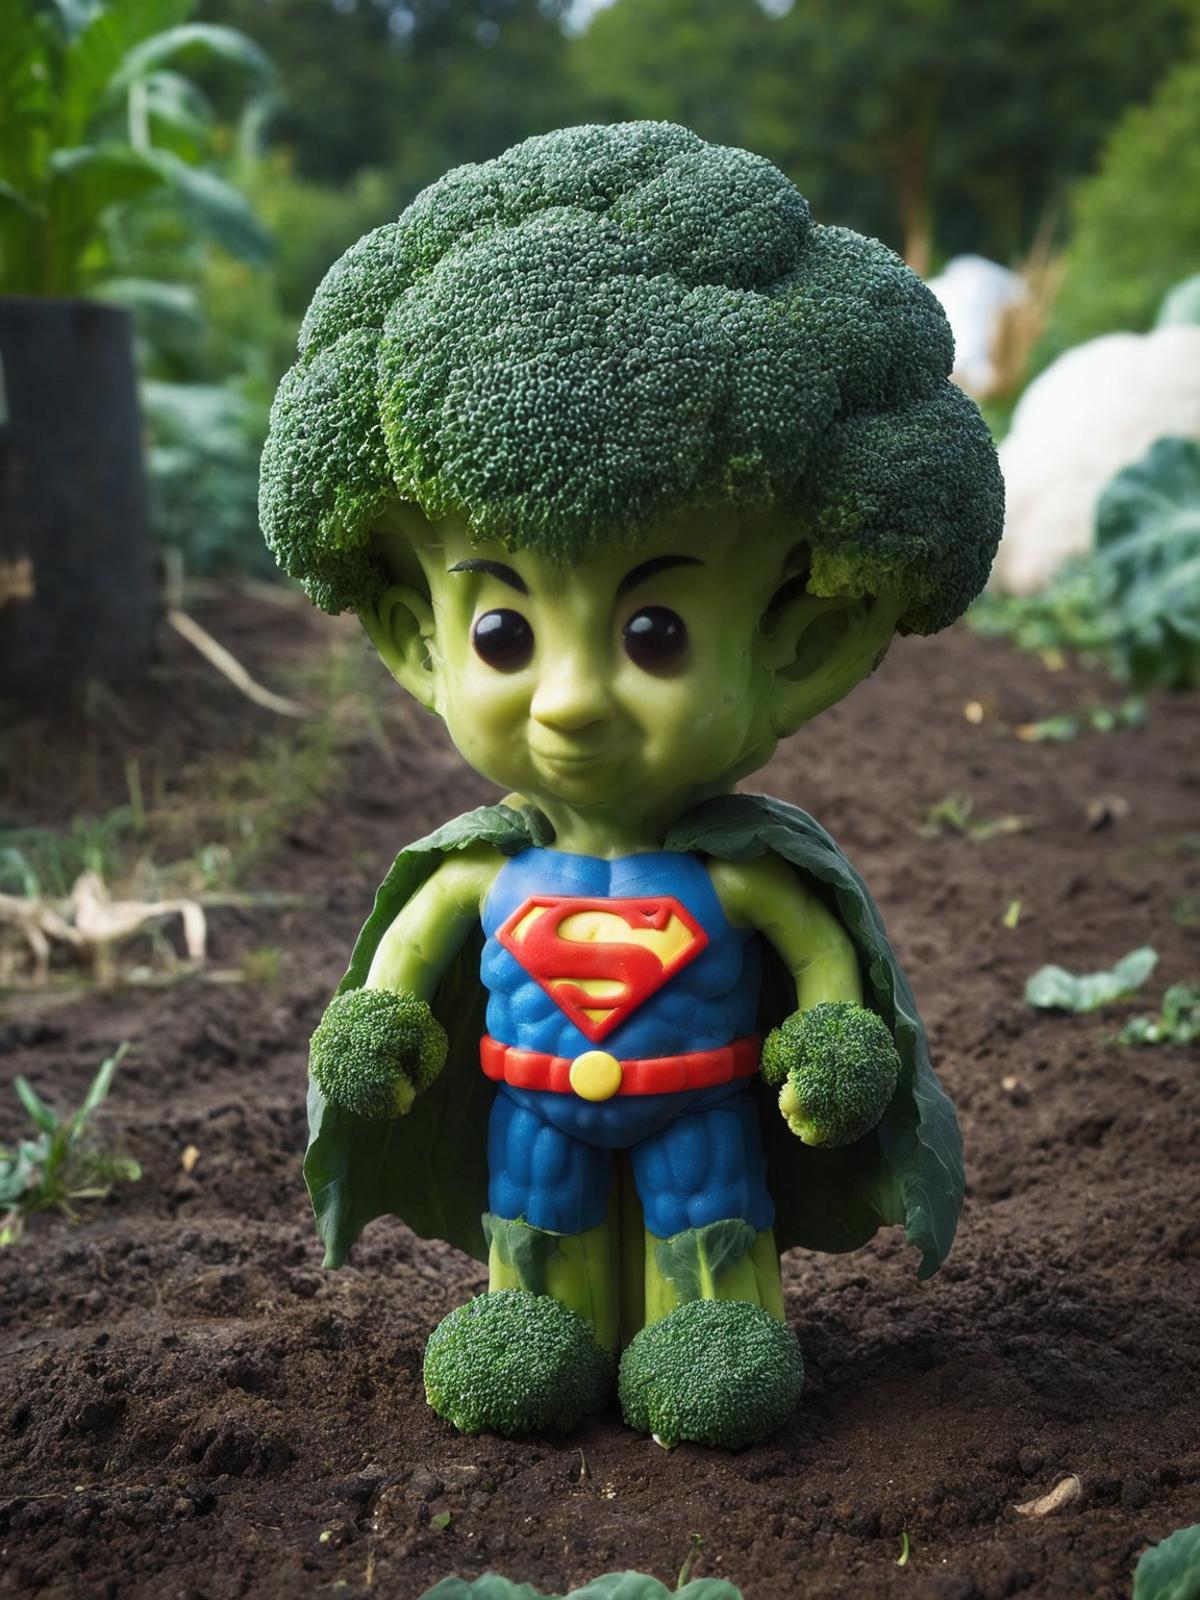 A statue of a broccoli man with a cape and a green crown.